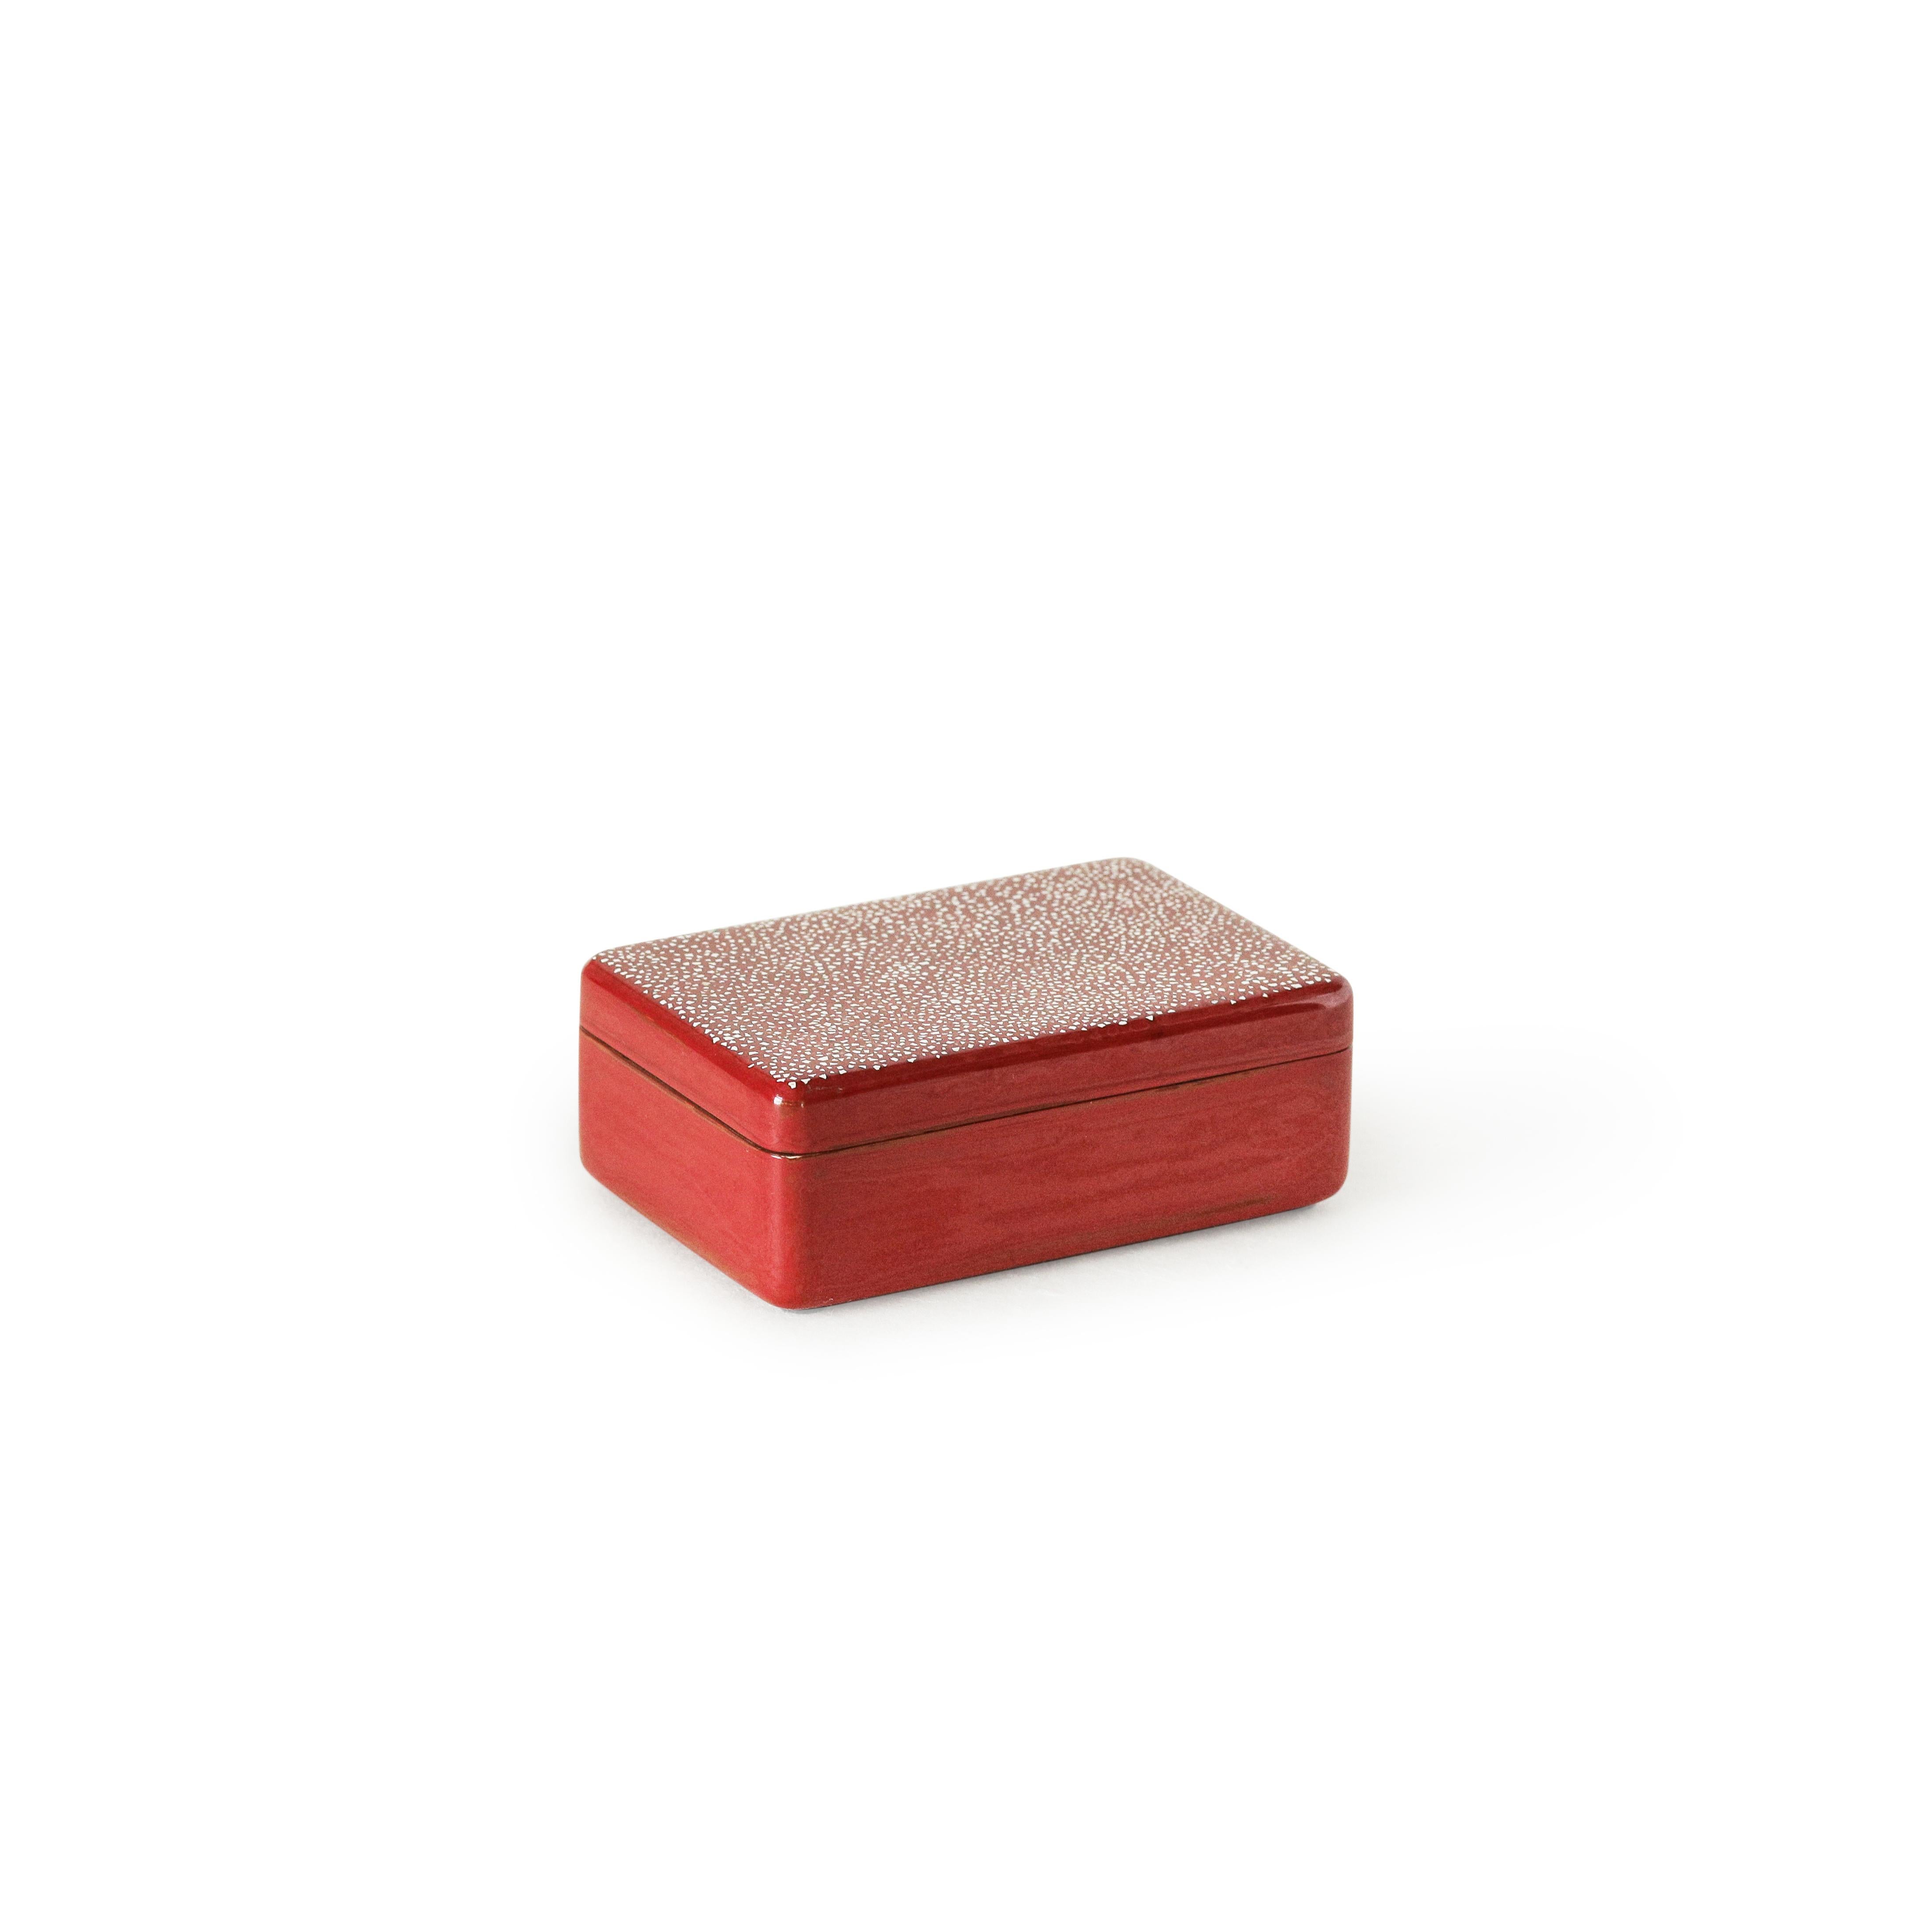 Urushi Natural Red Lacquer Allsorts Box - Small by Alexander Lamont For Sale